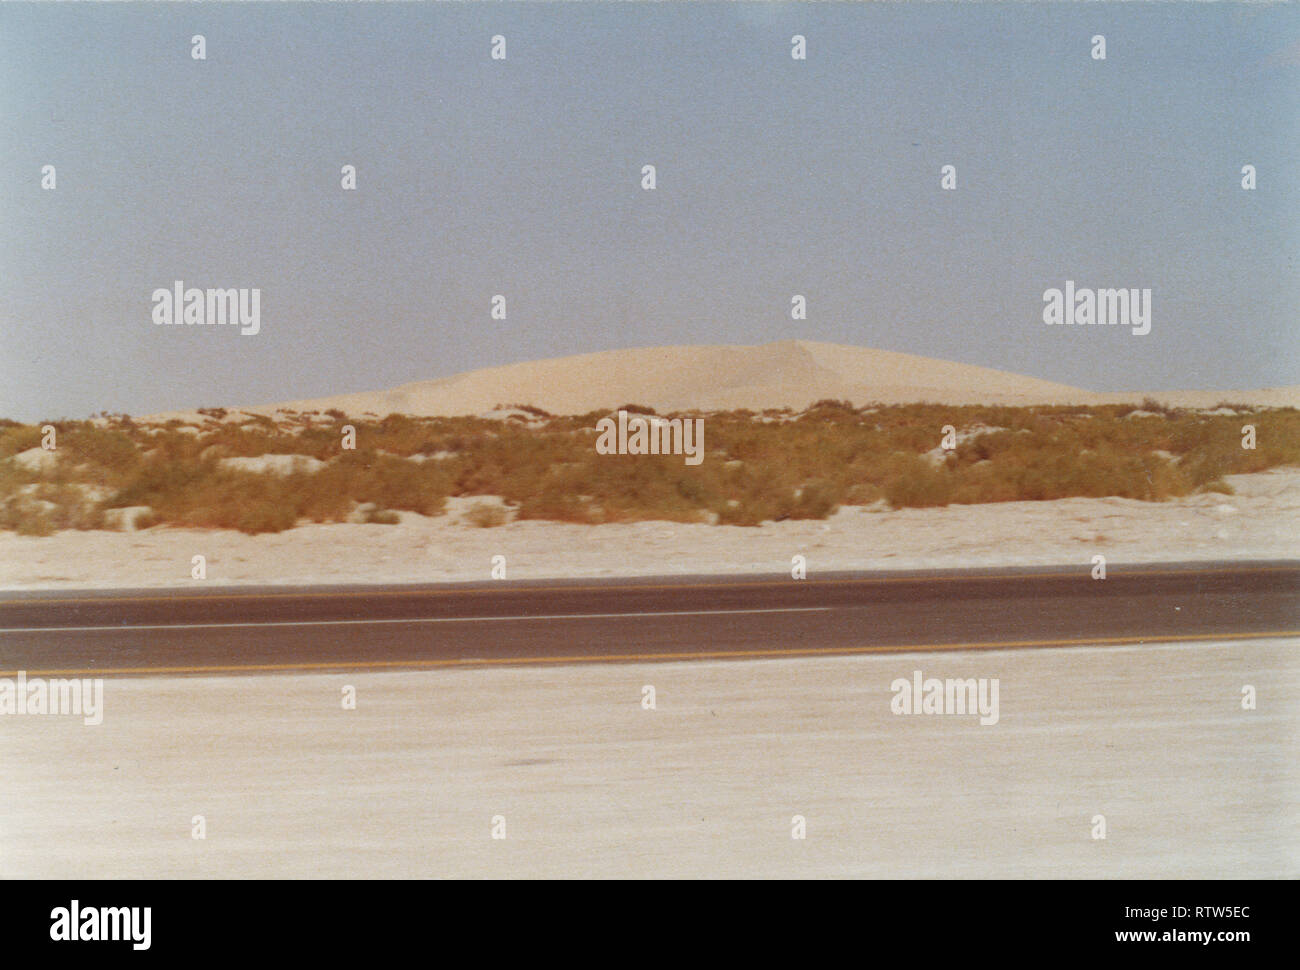 The road from the Abqaiq, a Saudi Aramco camp, to Qarrayah Beach, the town's closet private beach. The road is filled with sand dunes and often has camel herds driven by shepherds. Stock Photo